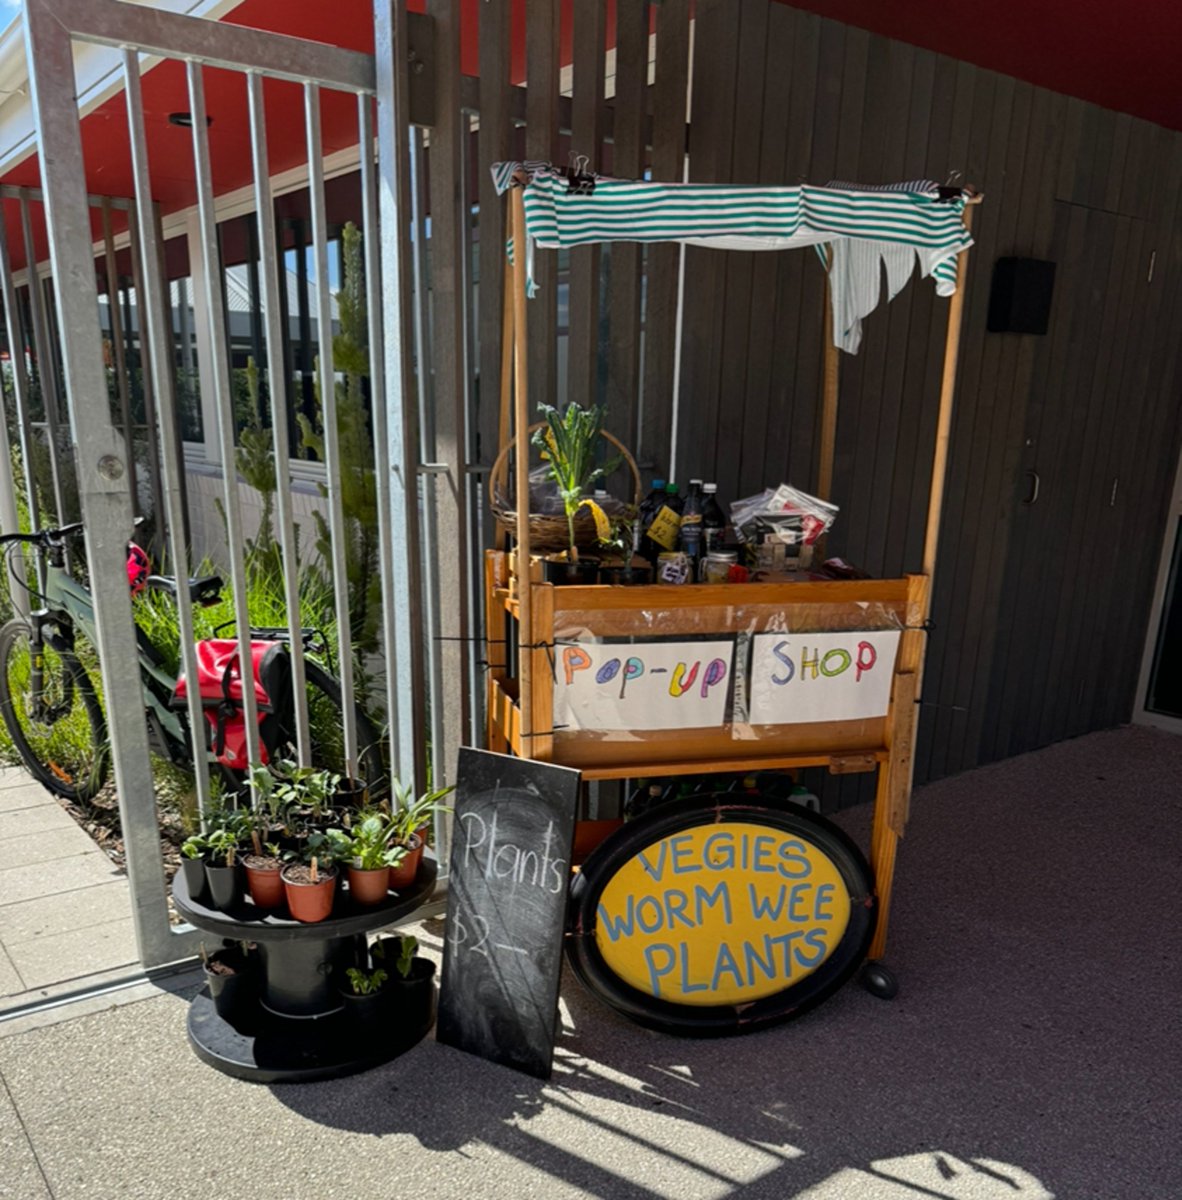 @handsonlearn Illawarra Primary School in TAS has created a pop-up shop and sell garden produce farmgate style on a Friday afternoon at pickup time. This offsets some of the food costs of their program.🍅🌱 @JasonClareMP @JulieCollinsMP @savechildrenaus